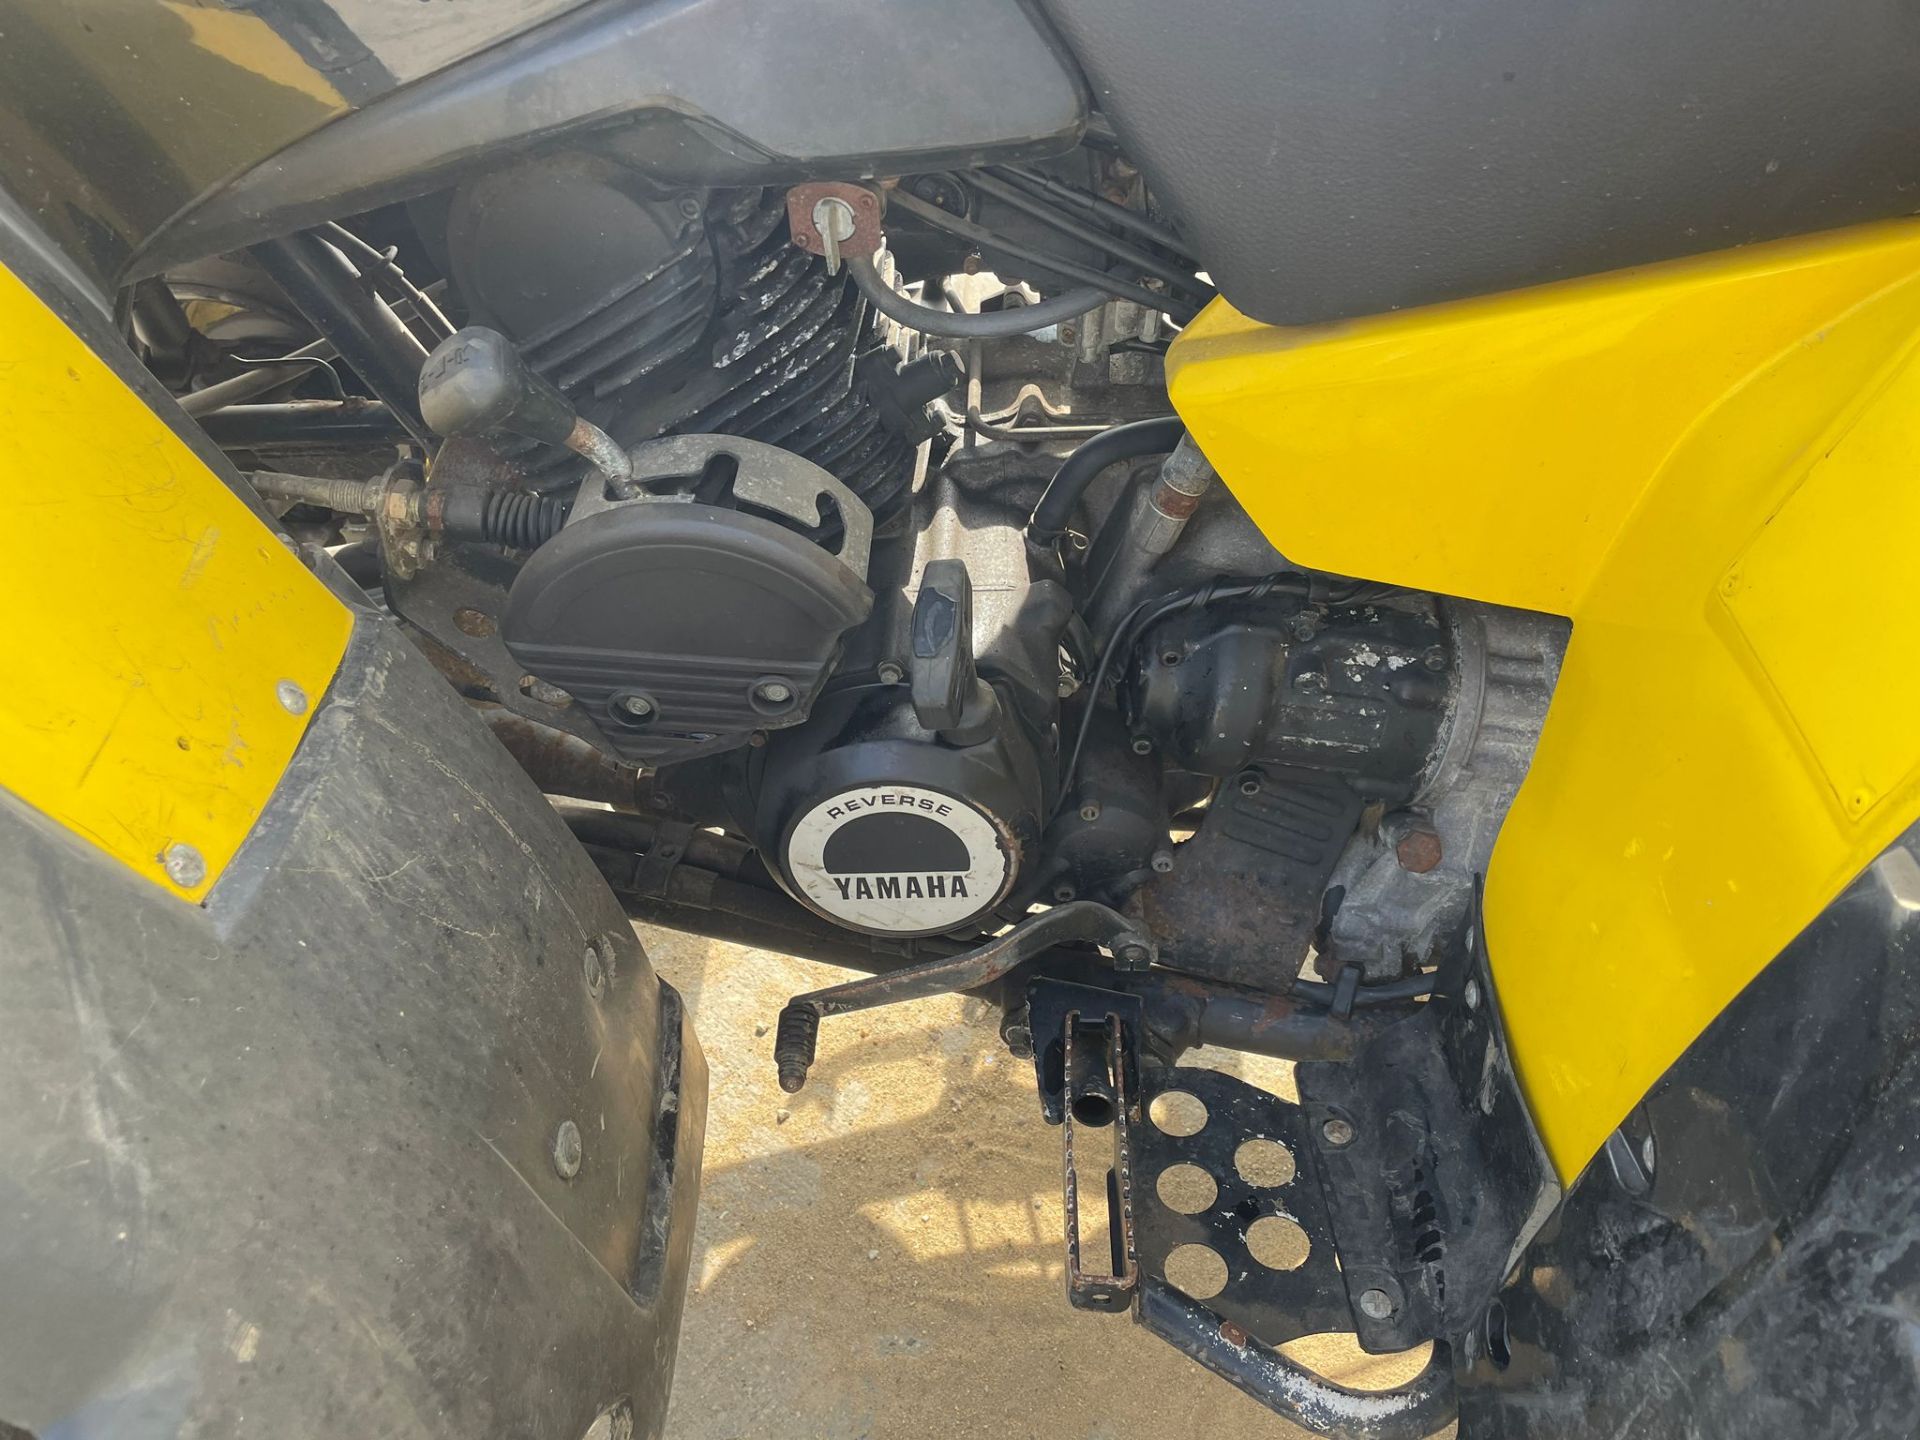 Yamaha Electric & Pull start Quad Bike, includes tow bar - Image 11 of 12